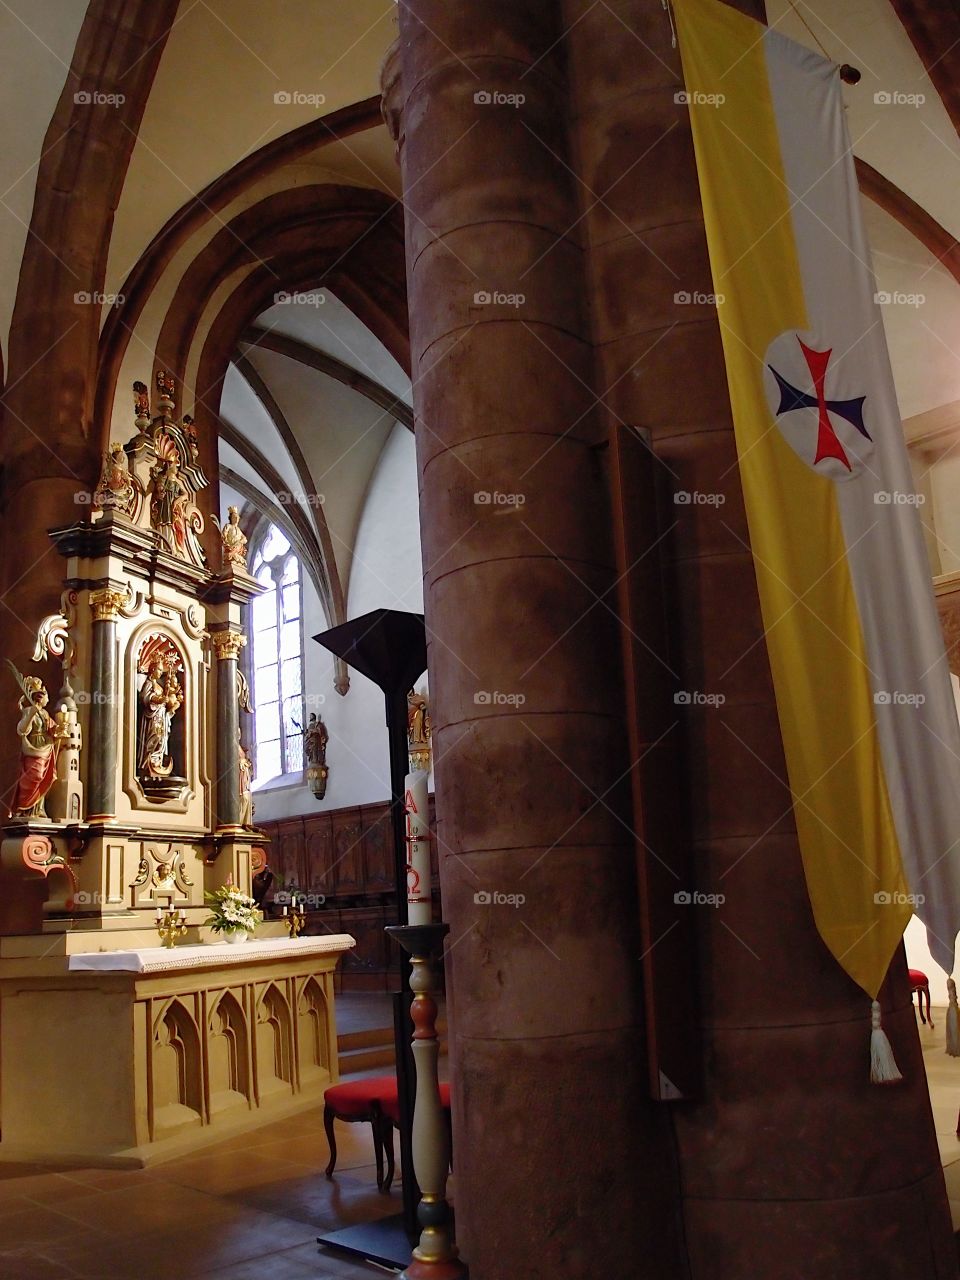 The interior of an old European church with ornate and finely detailed alters and statues. 